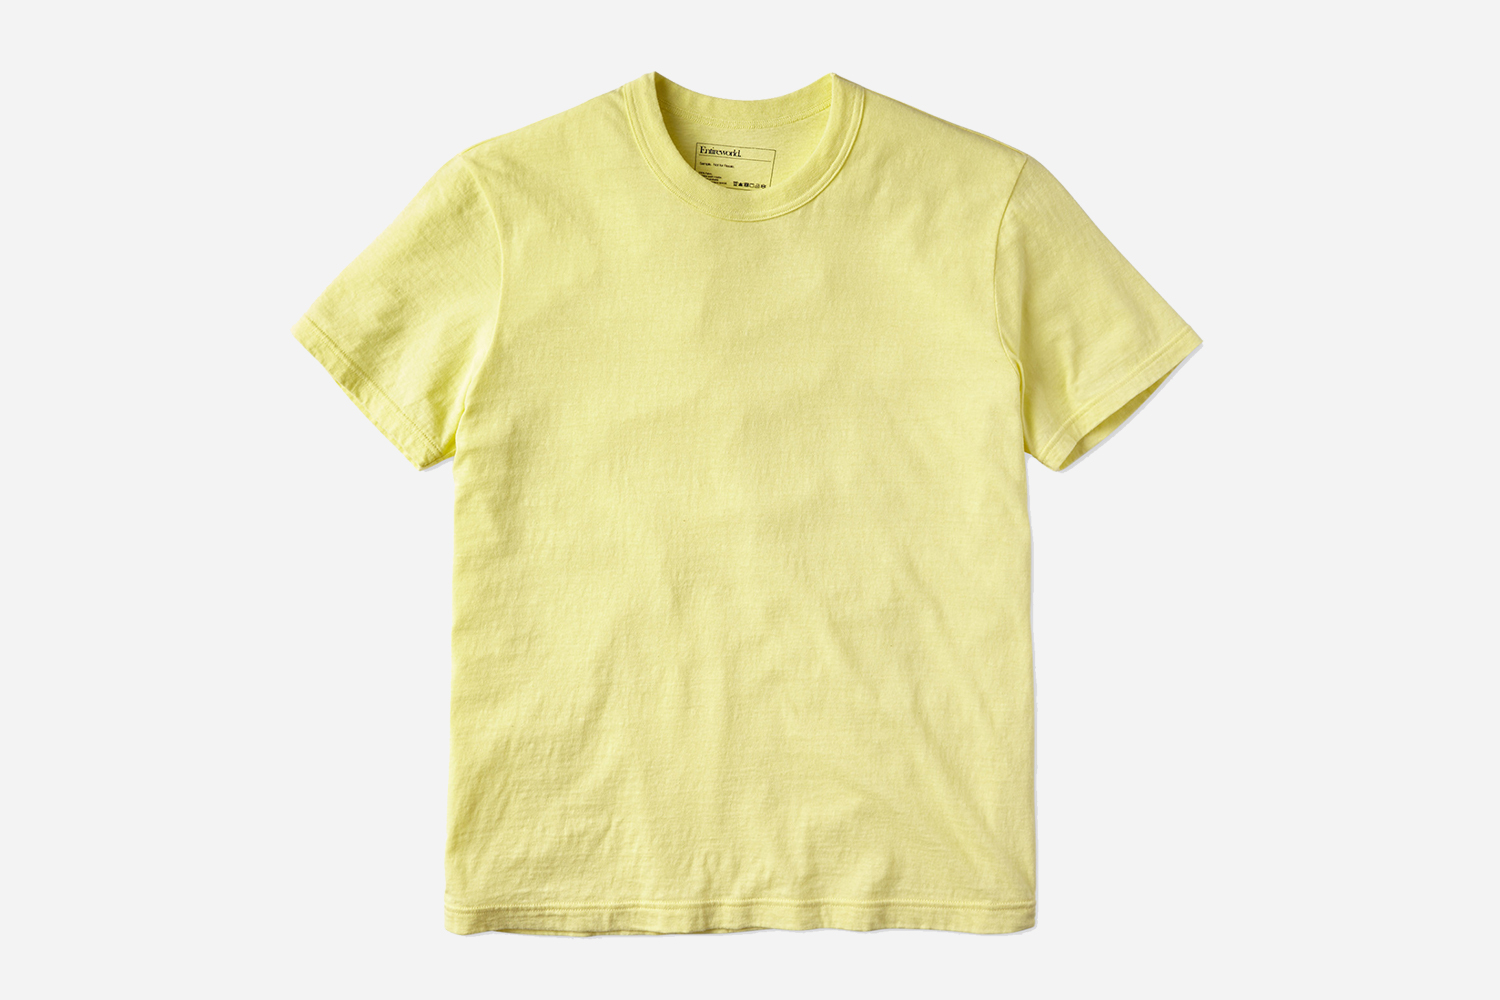 Entireworld Recycled Cotton T-Shirt